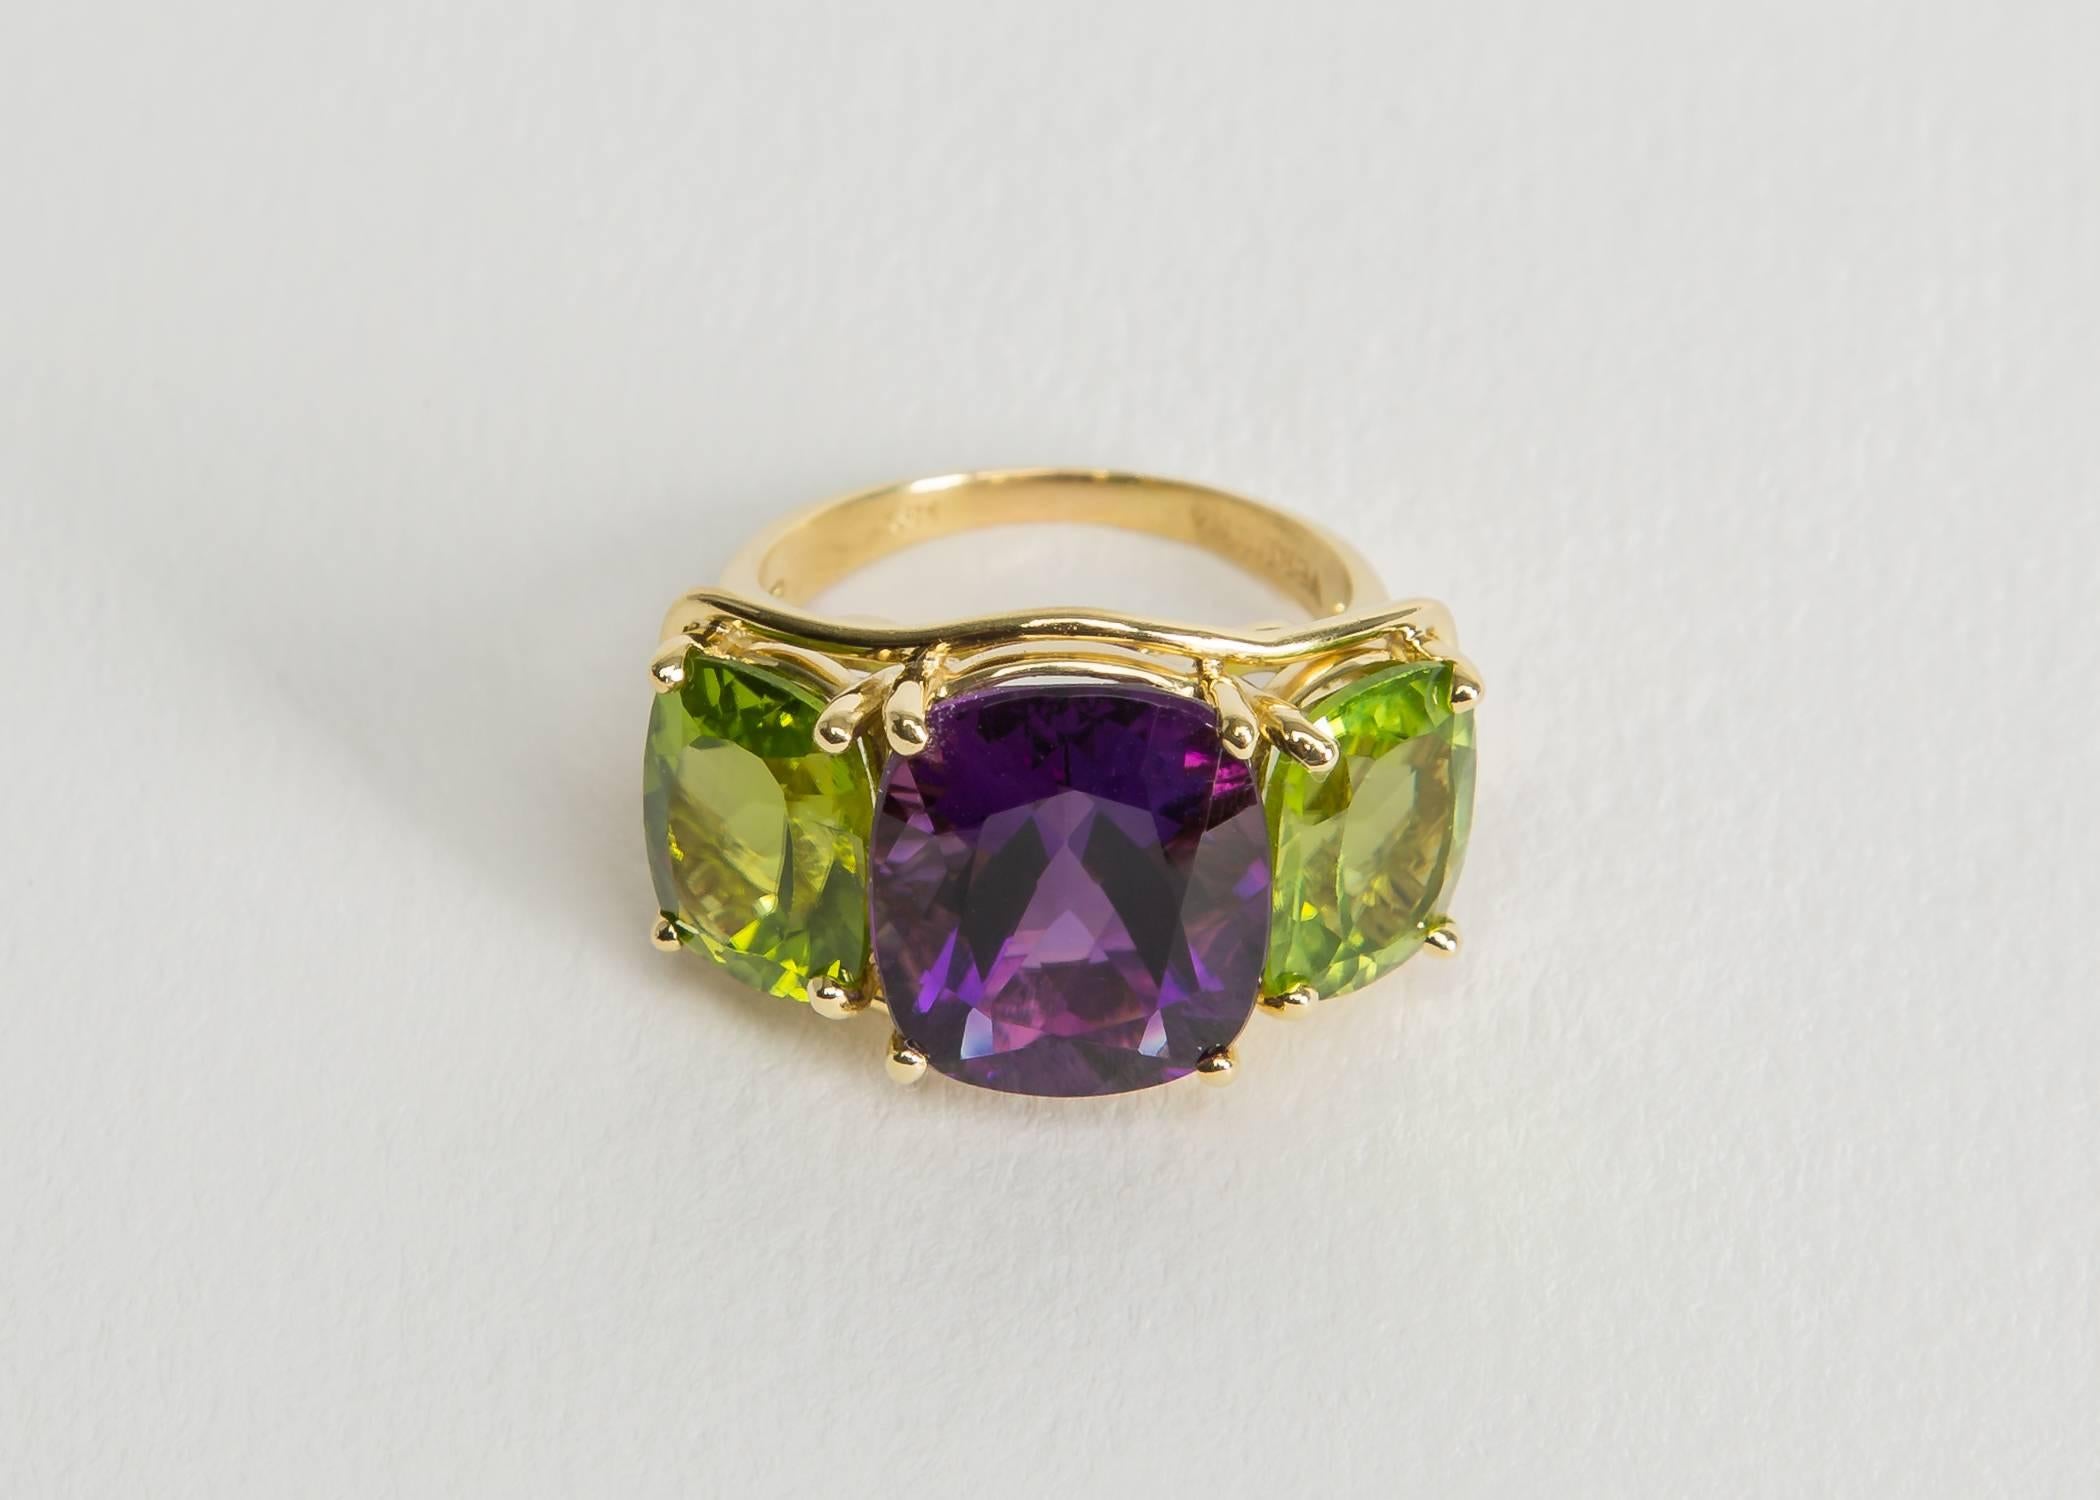 A Verdura classic. This is the larger of two sizes Verdura creates their classic three stone ring in. Rich amethyst is flanked by bright peridots. Chic and easy to wear. 